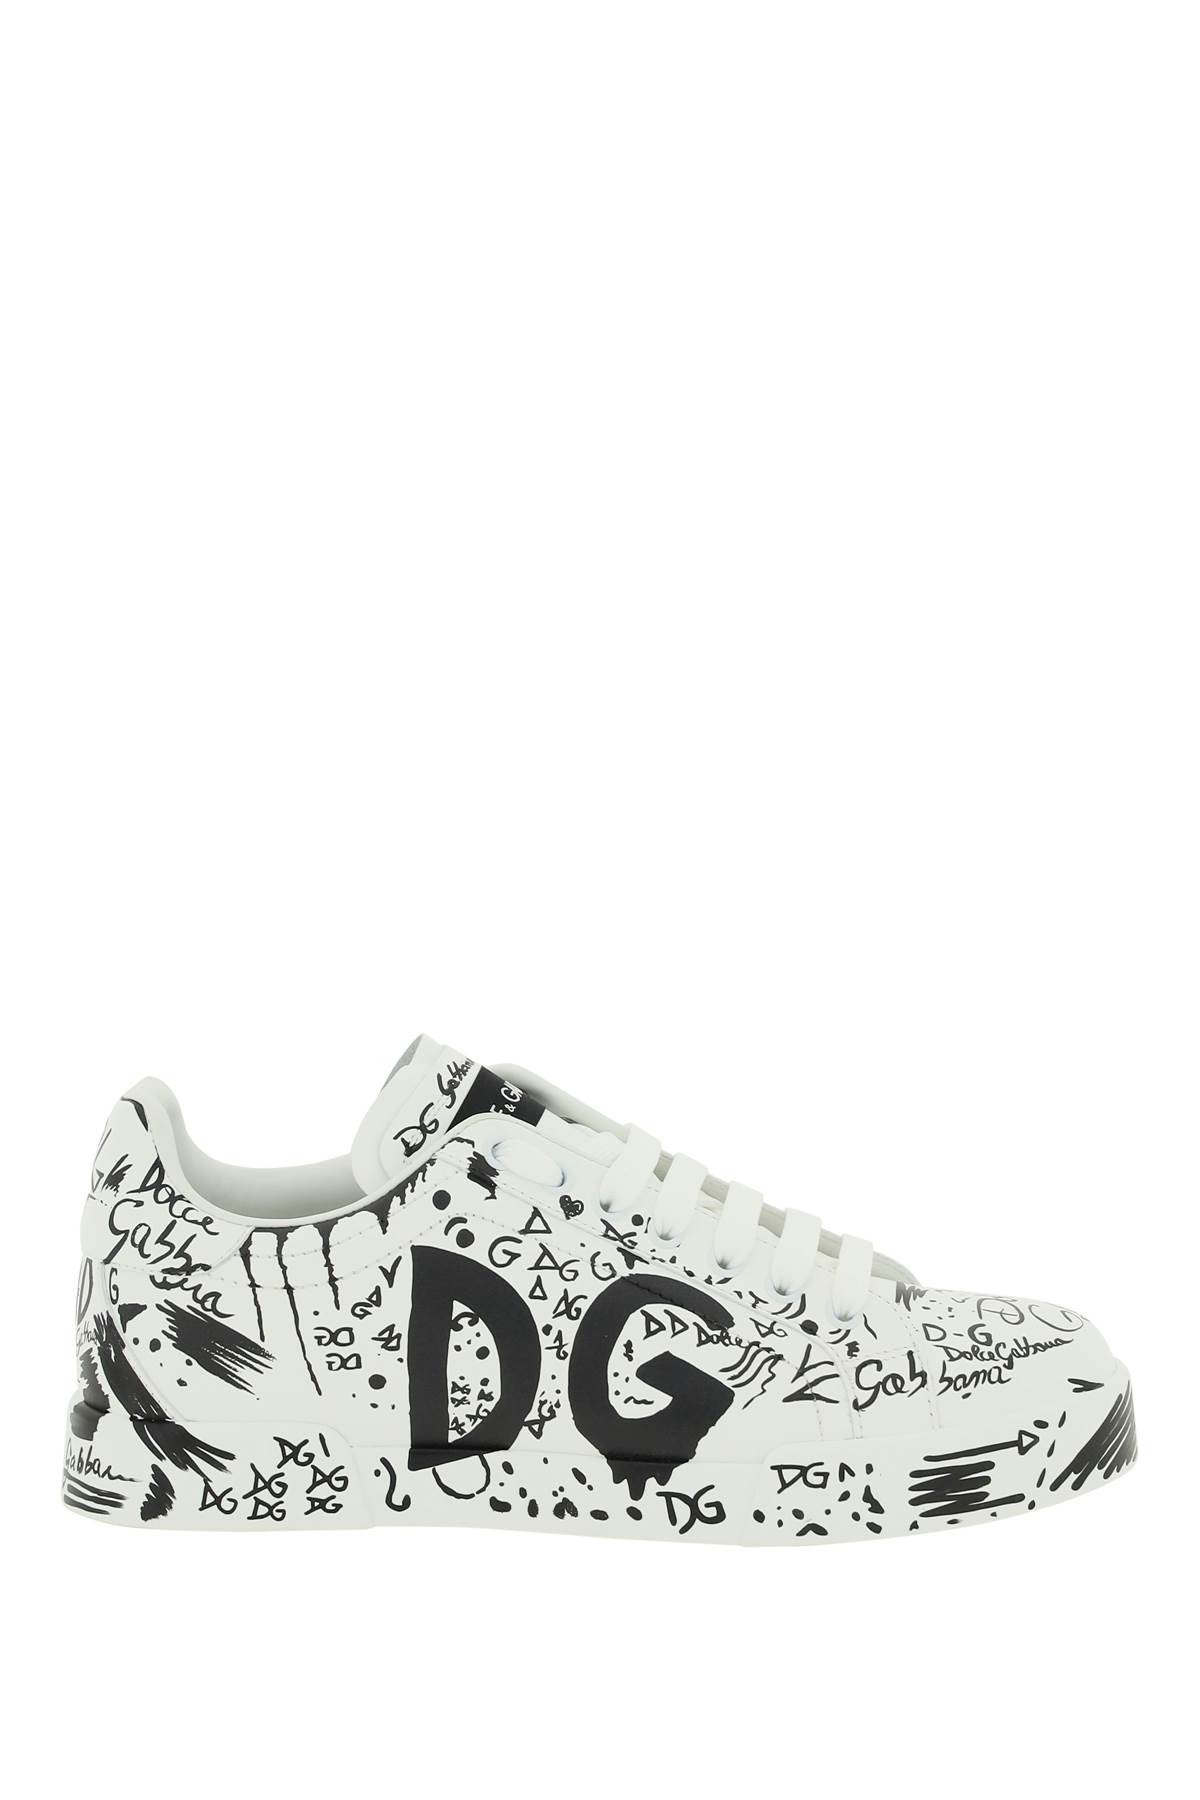 Dolce & Gabbana Hand-painted Leather Portofino Sneakers